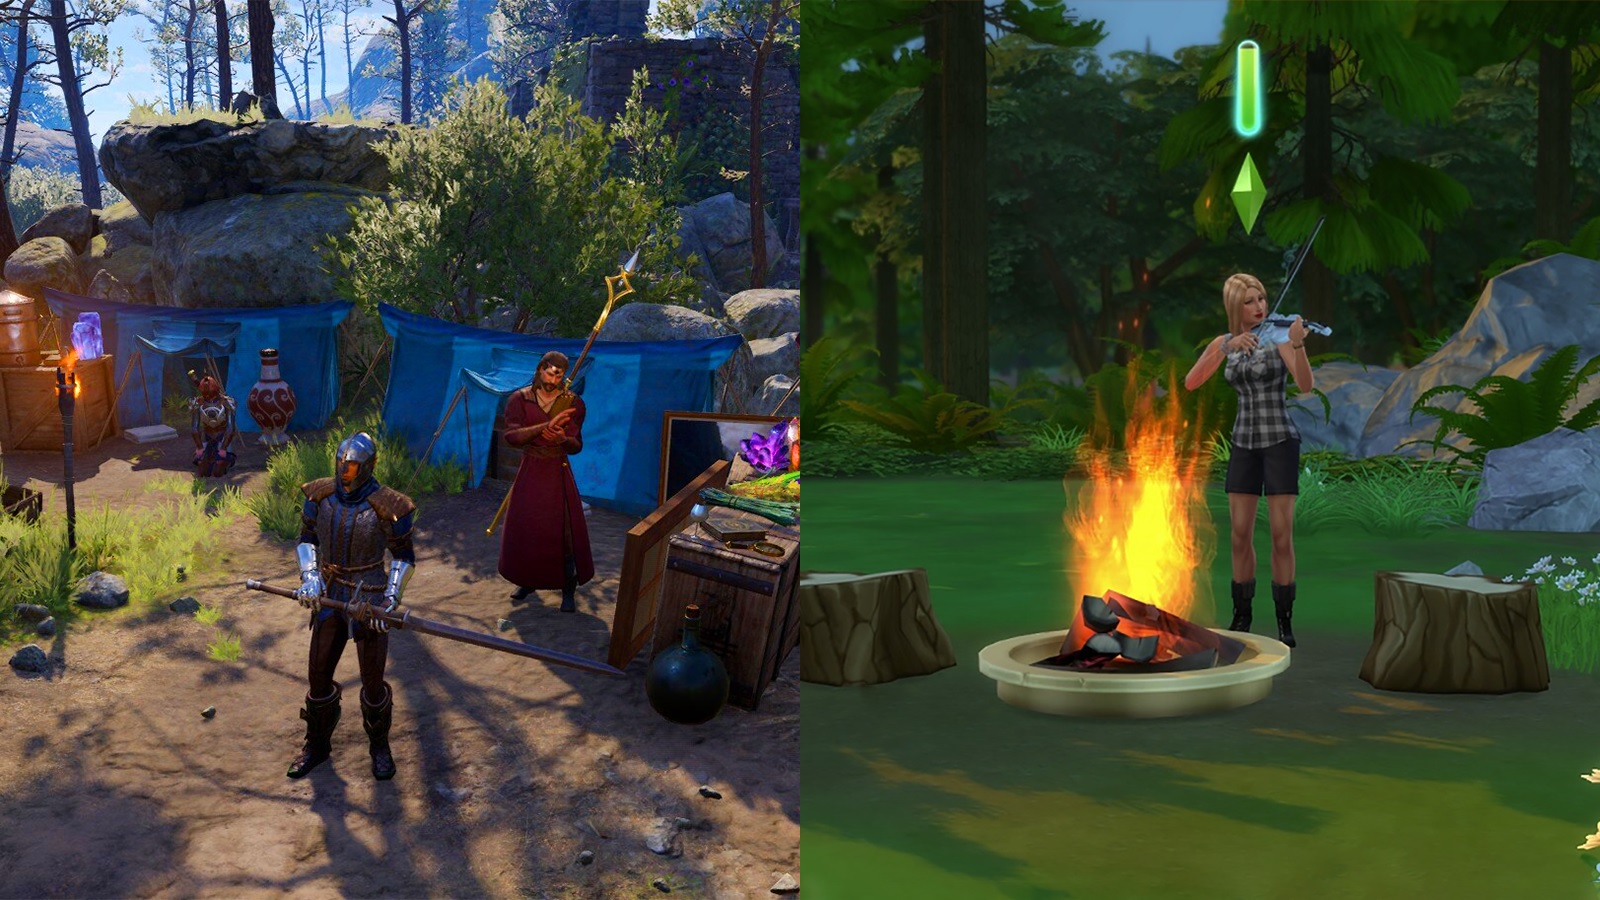 The Sims inspire Baldur’s Gate 3 players to camp